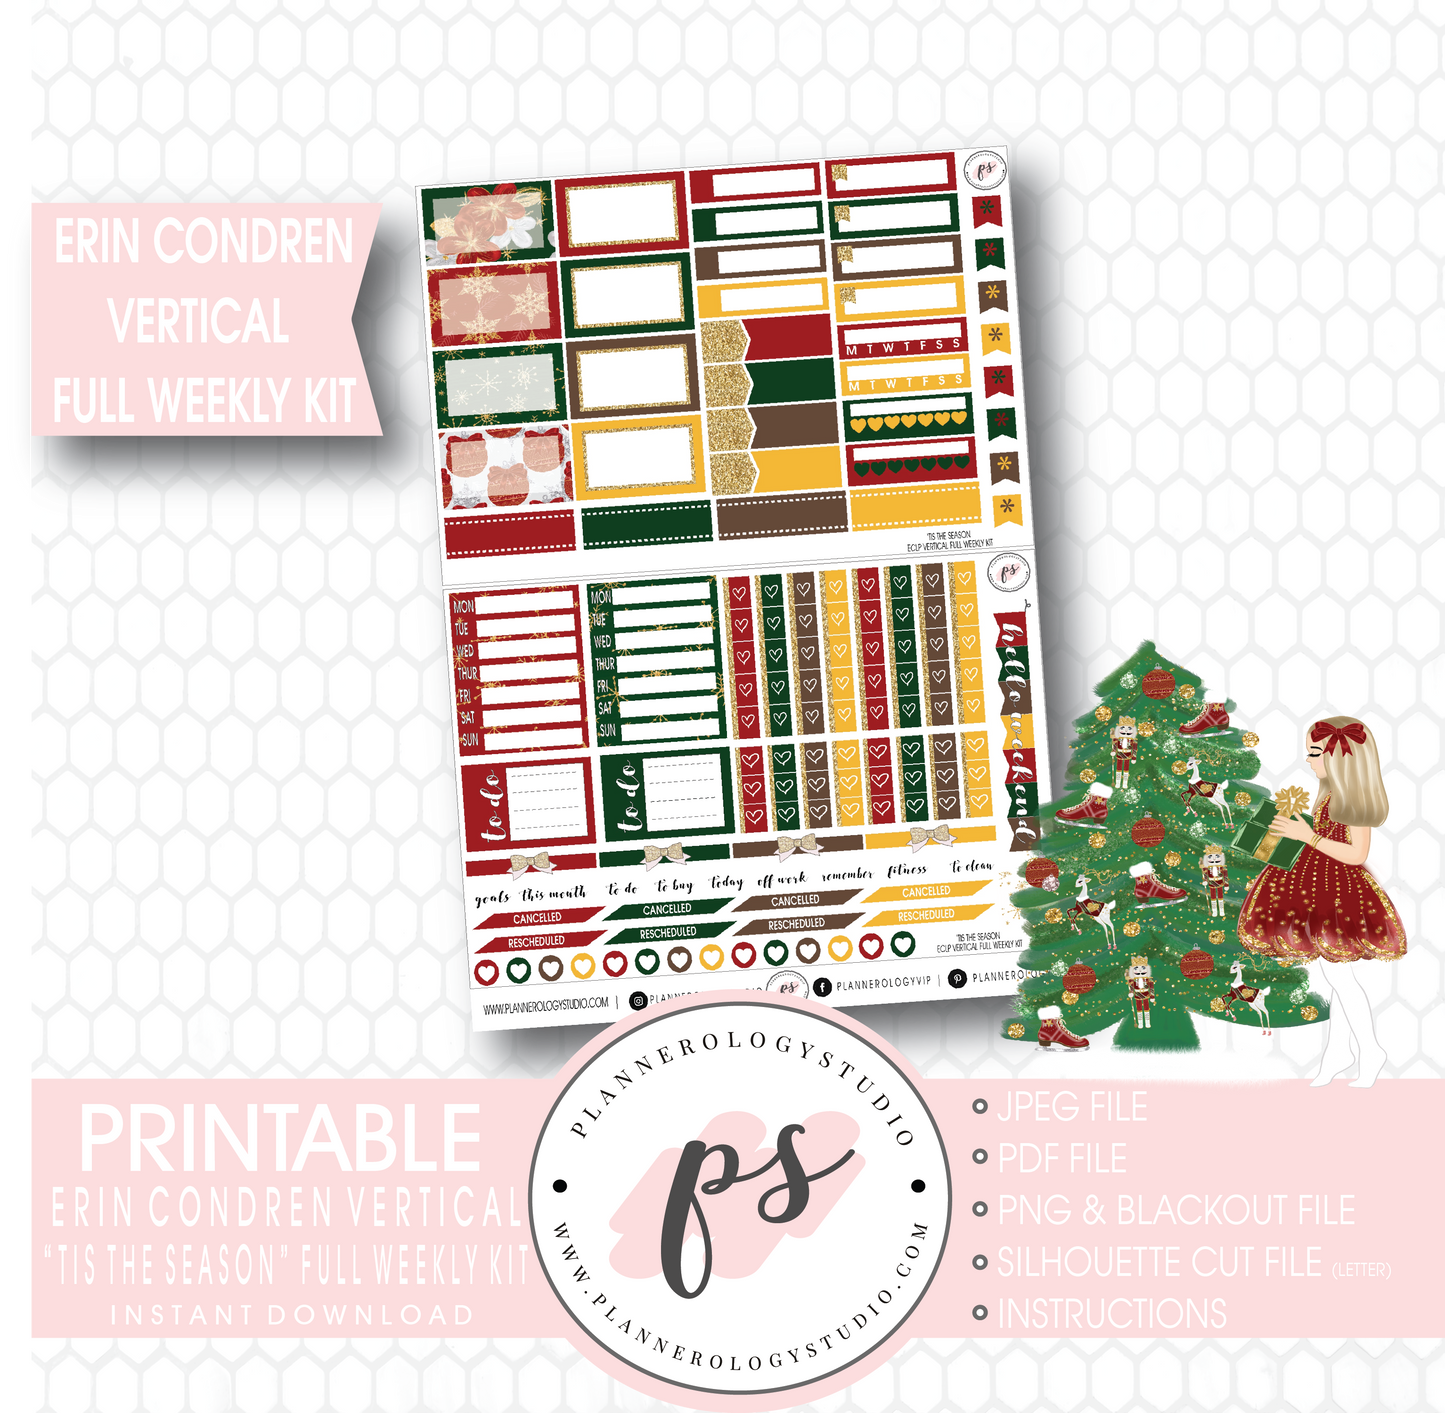 'Tis the Season Christmas Full Weekly Kit Printable Planner Stickers (for use with Erin Condren Vertical) - Plannerologystudio